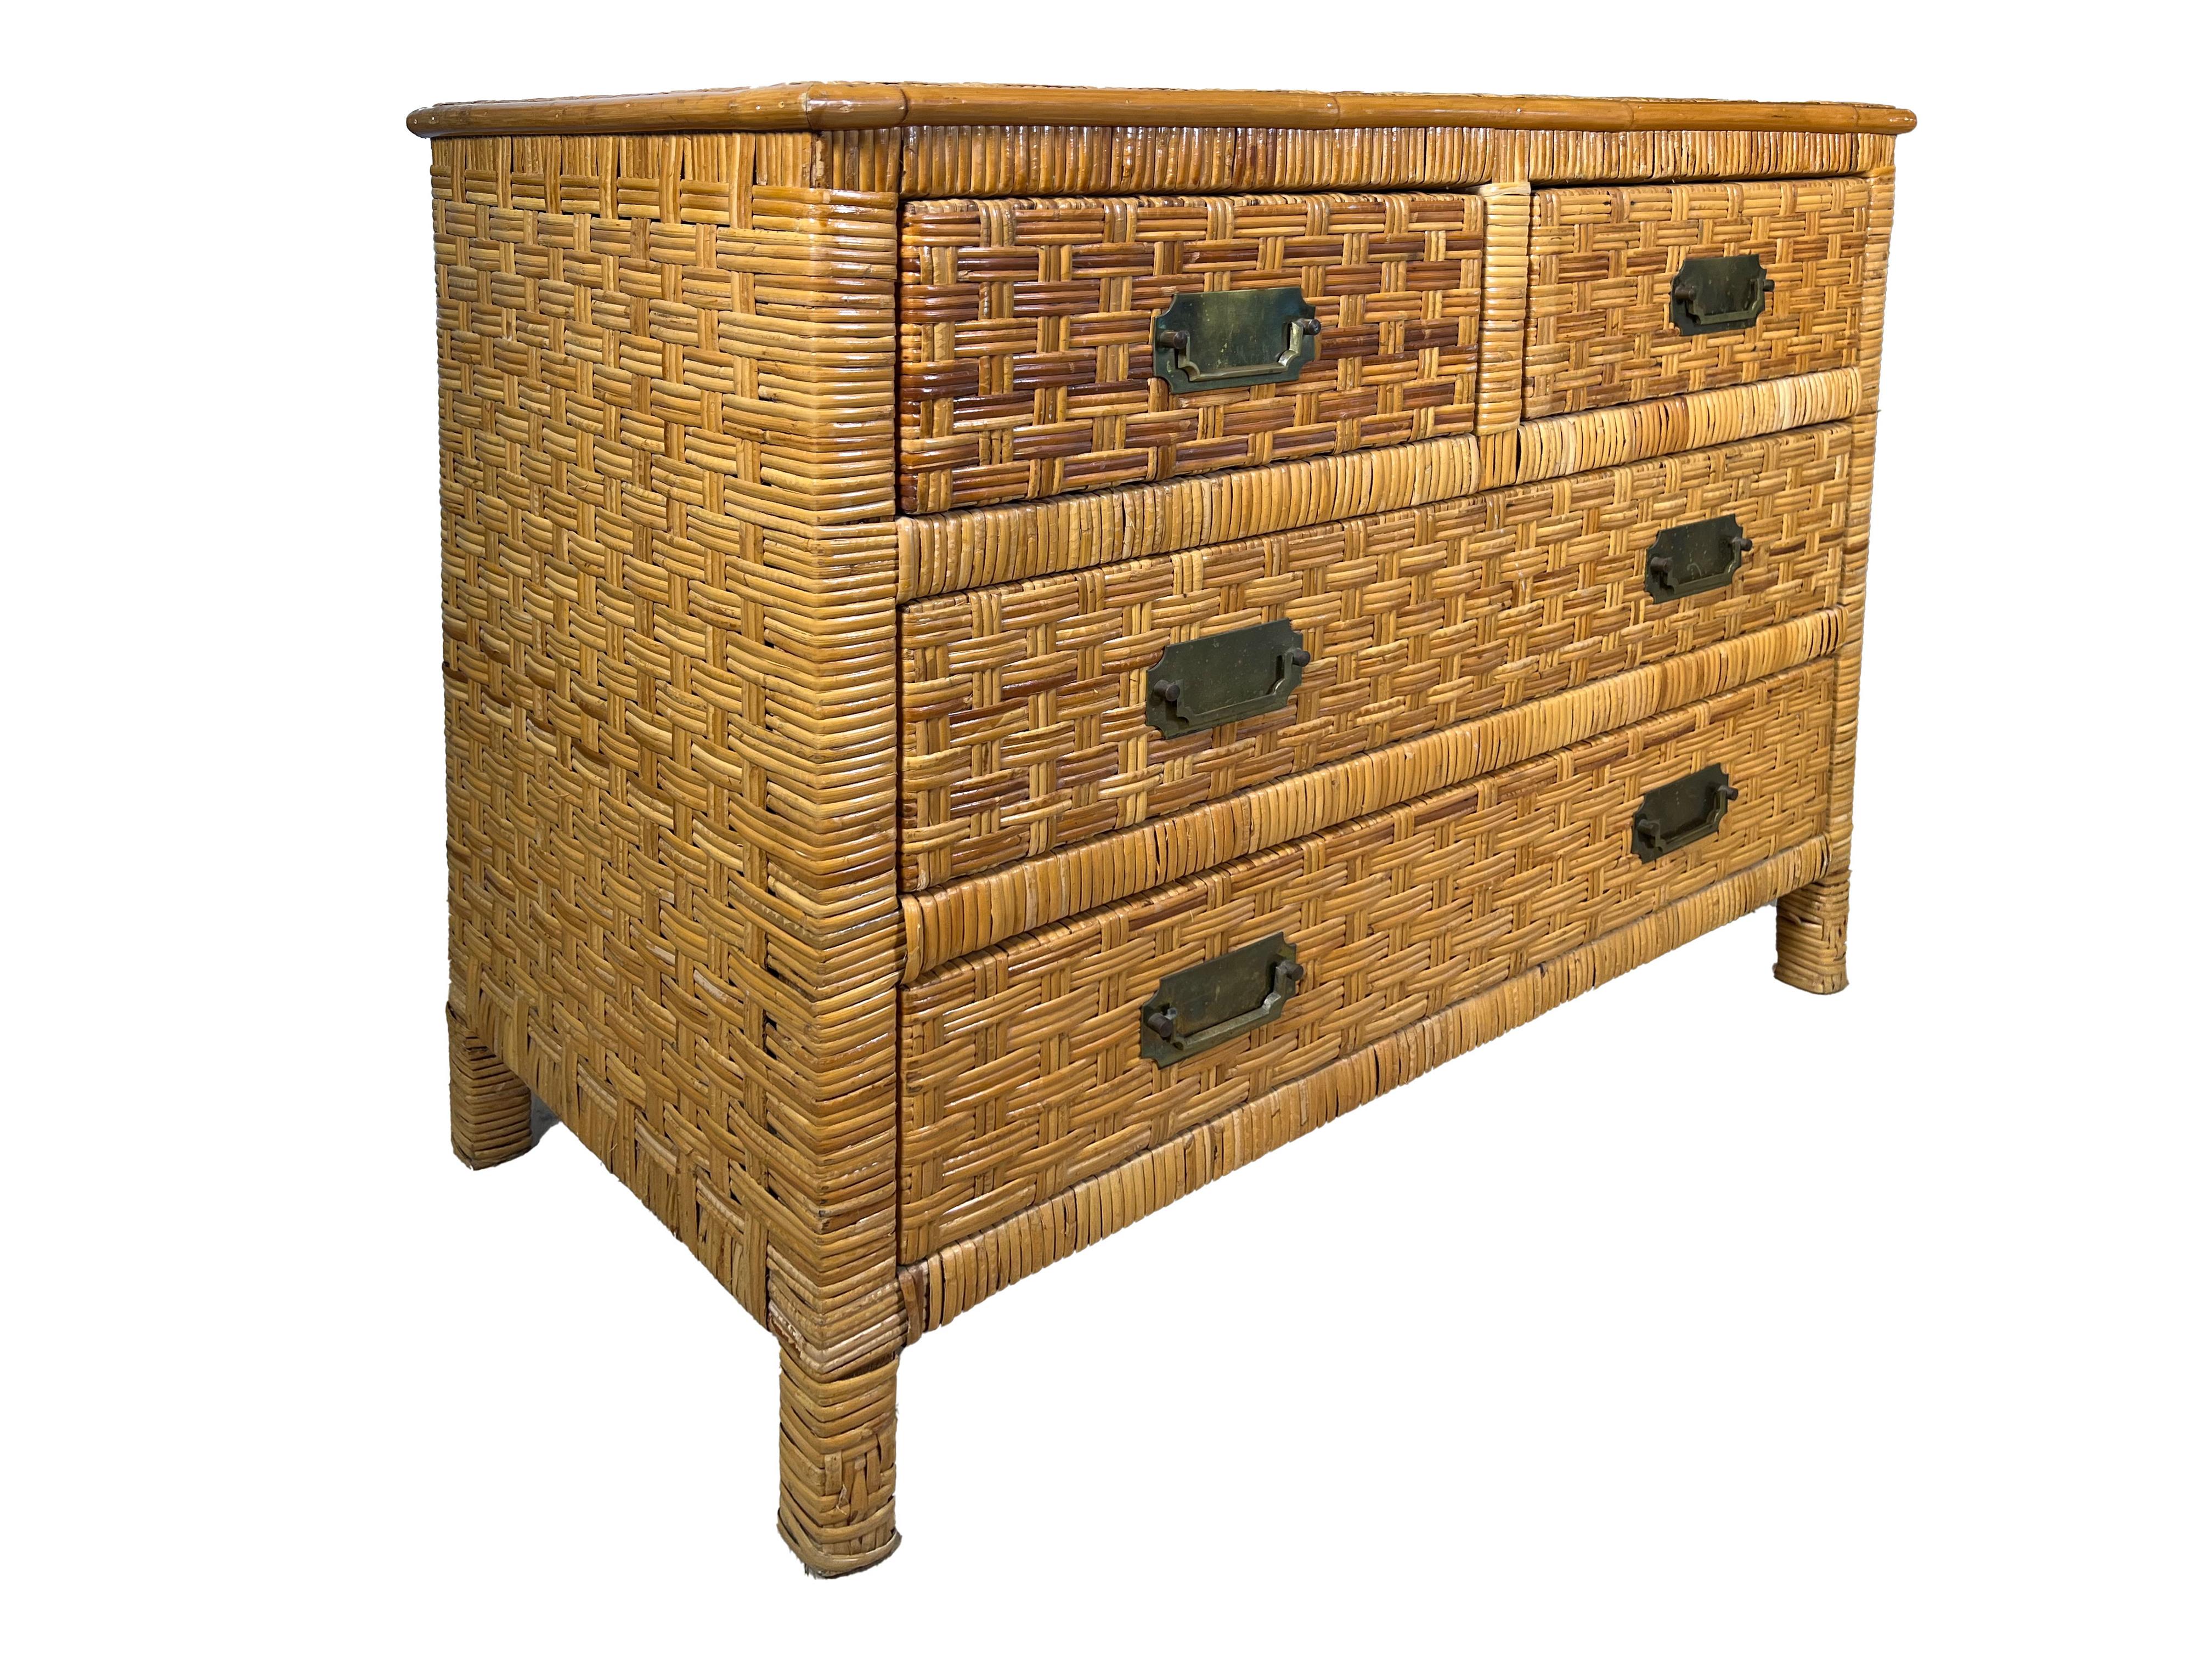 Vintage Coastal Woven Rattan Chest of Drawers with Brass Handles

Offered for sale is a delightful Coastal vintage chest of drawers with woven rattan throughout. The chest has four wooden drawers with 2 large bottom ones and 2 smaller ones at the